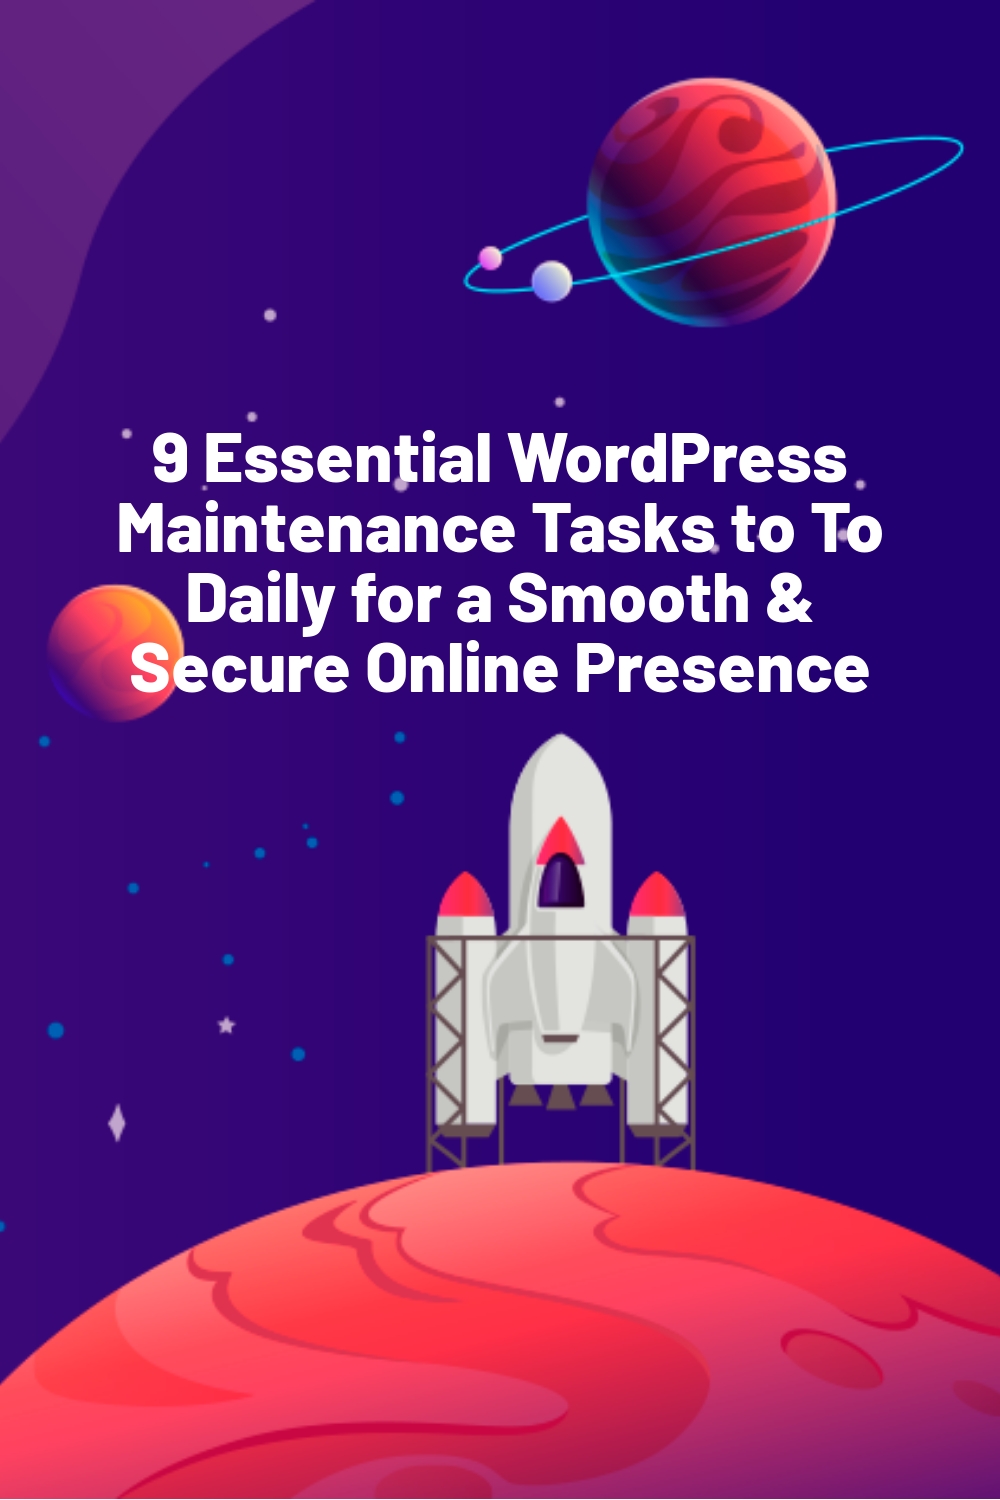 9 Essential WordPress Maintenance Tasks to To Daily for a Smooth & Secure Online Presence